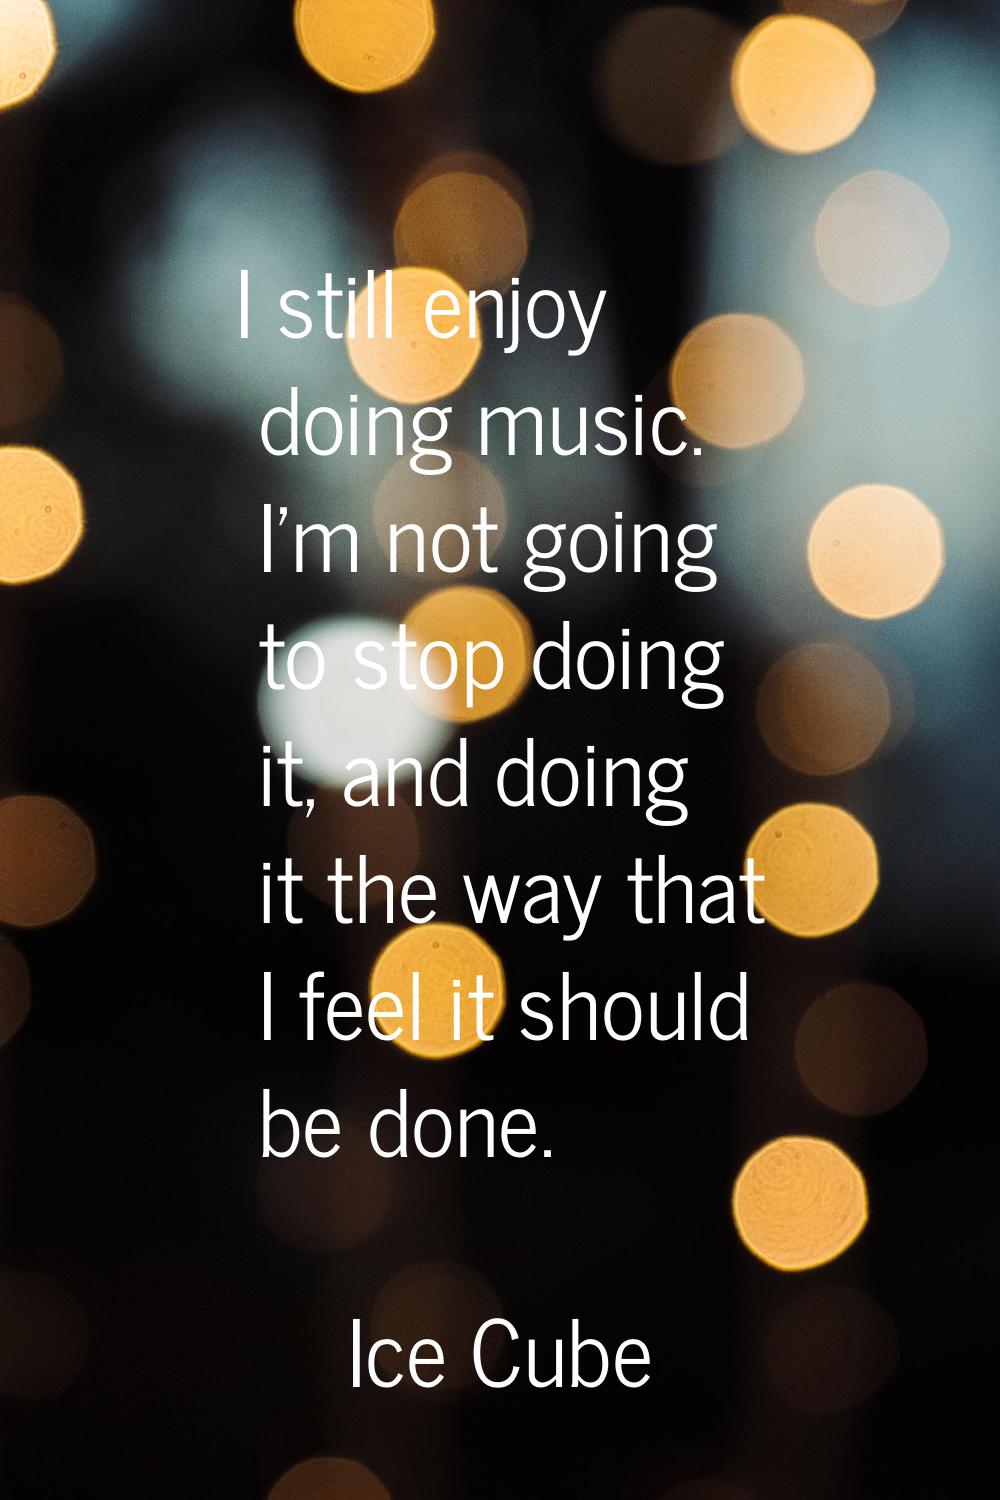 I still enjoy doing music. I'm not going to stop doing it, and doing it the way that I feel it shou